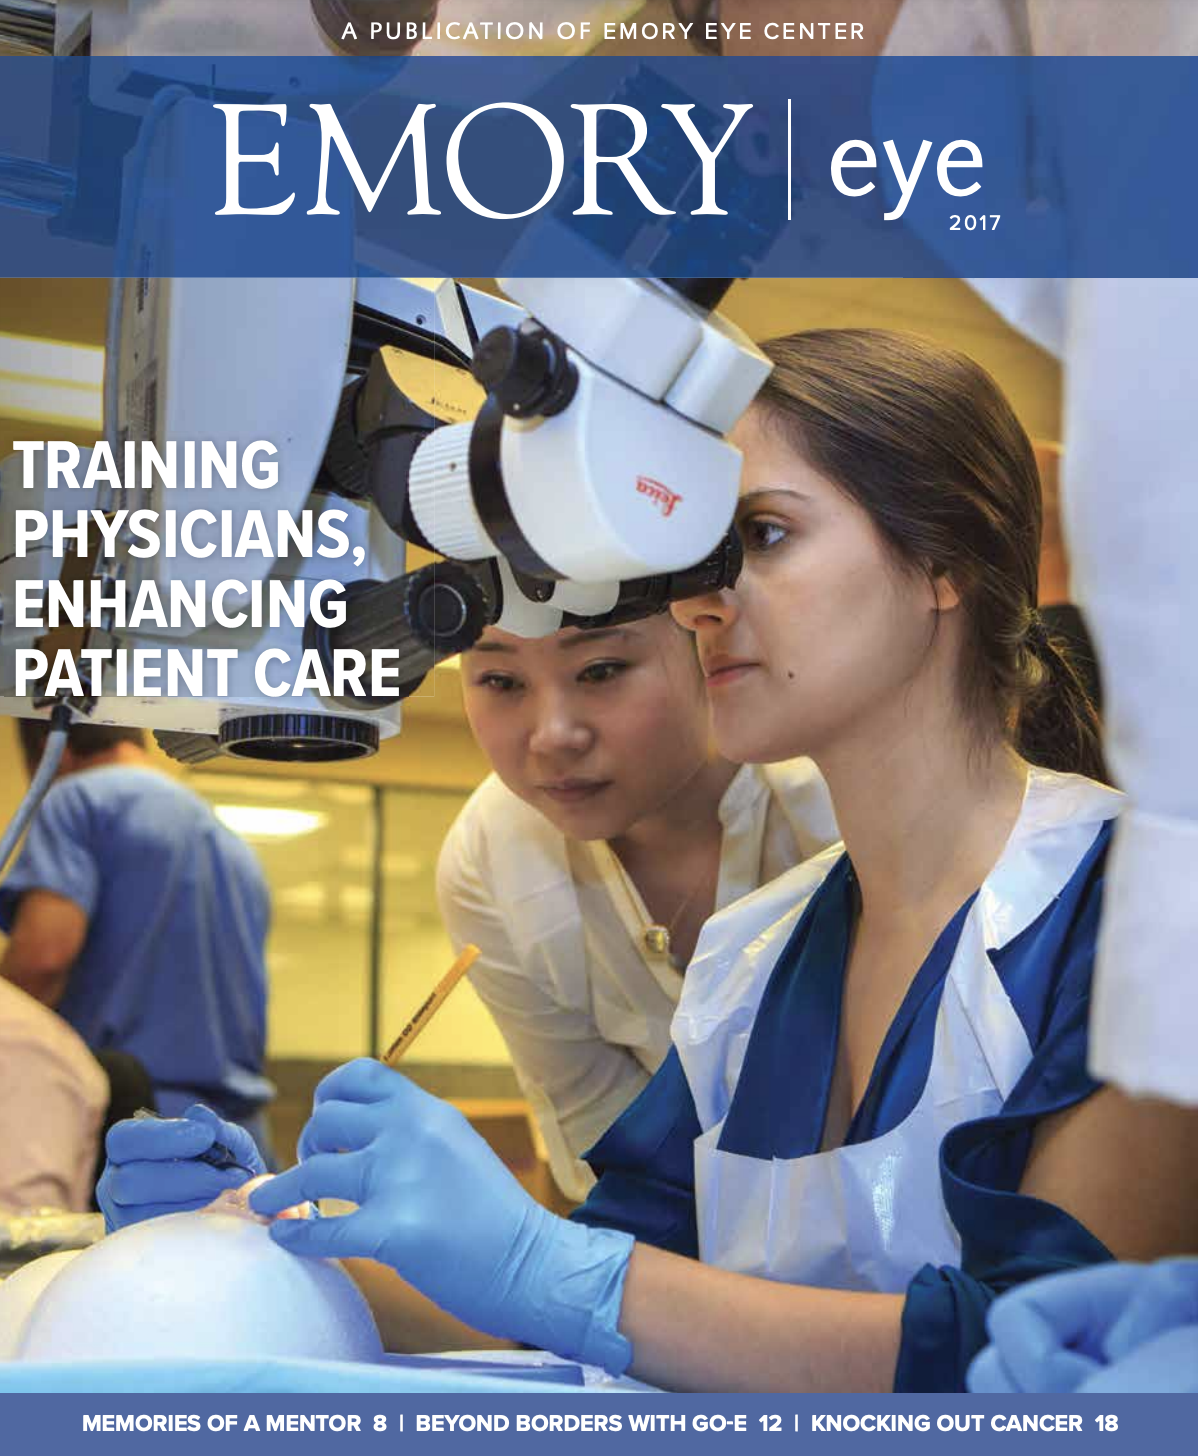 Magazine cover, entitled Training Physicians, Enhancing Patient Care with photo of a technician being trained on diagnostic equipment